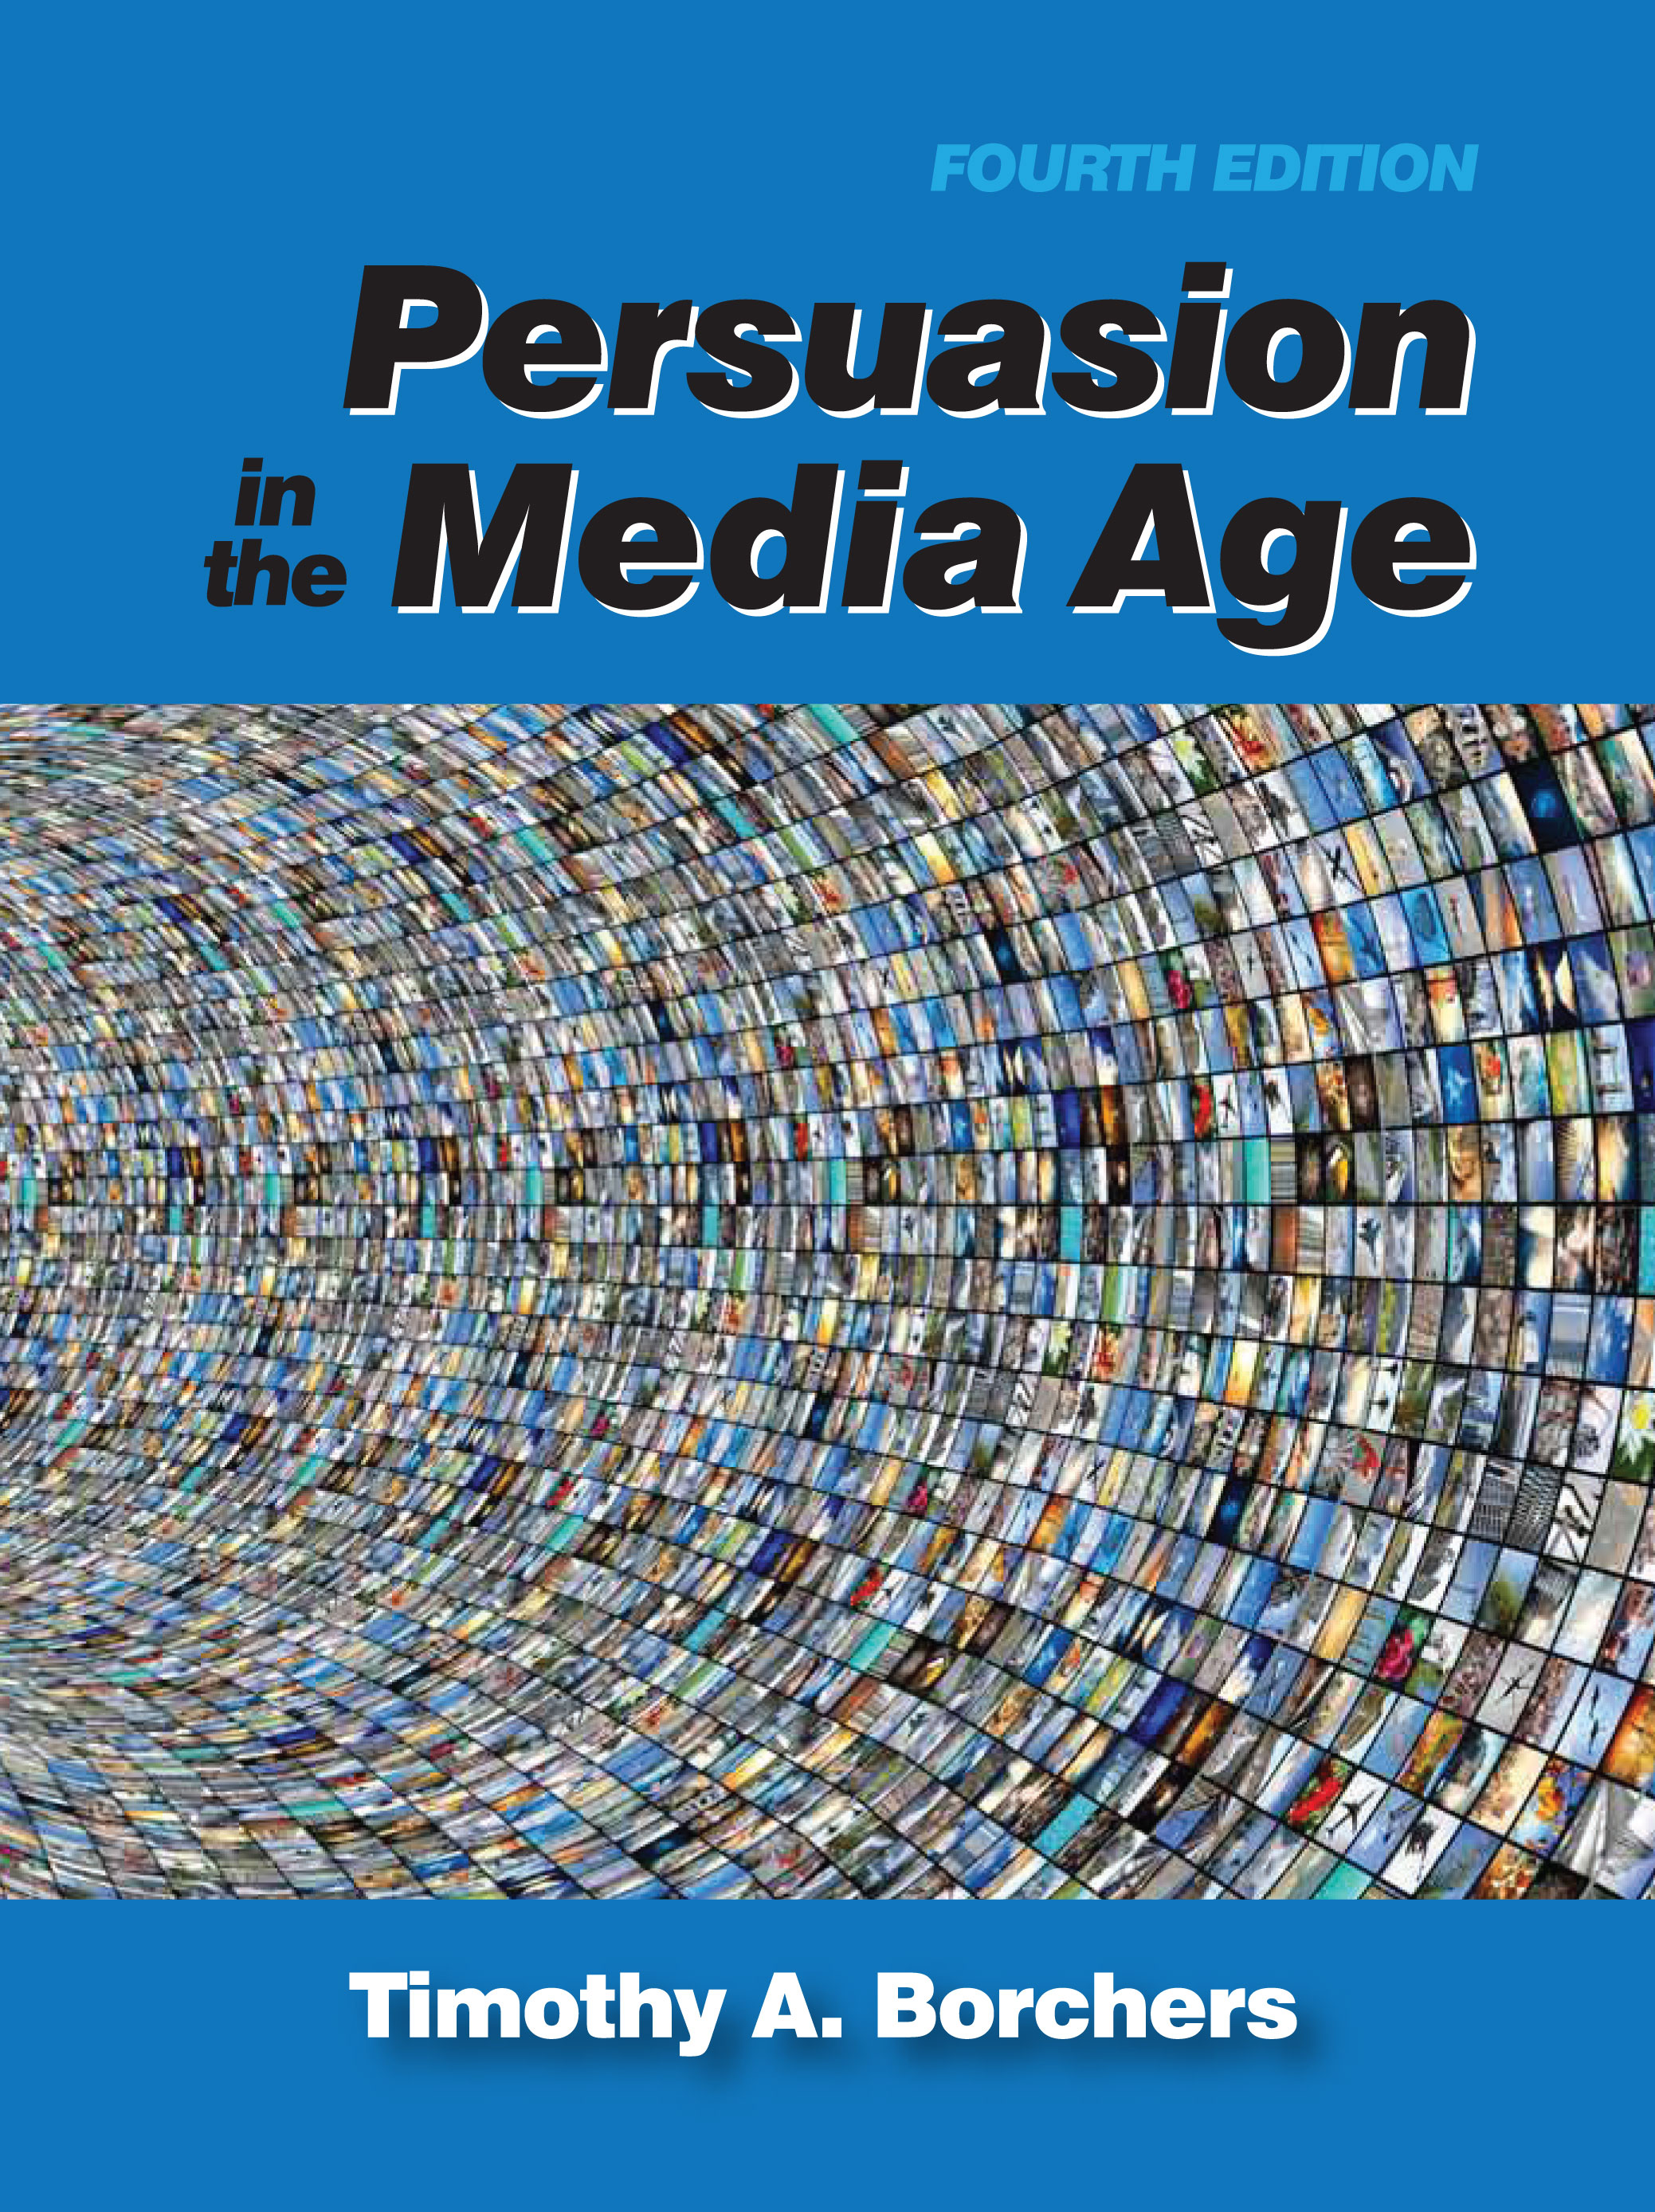 Persuasion in the Media Age:  by Timothy  Borchers